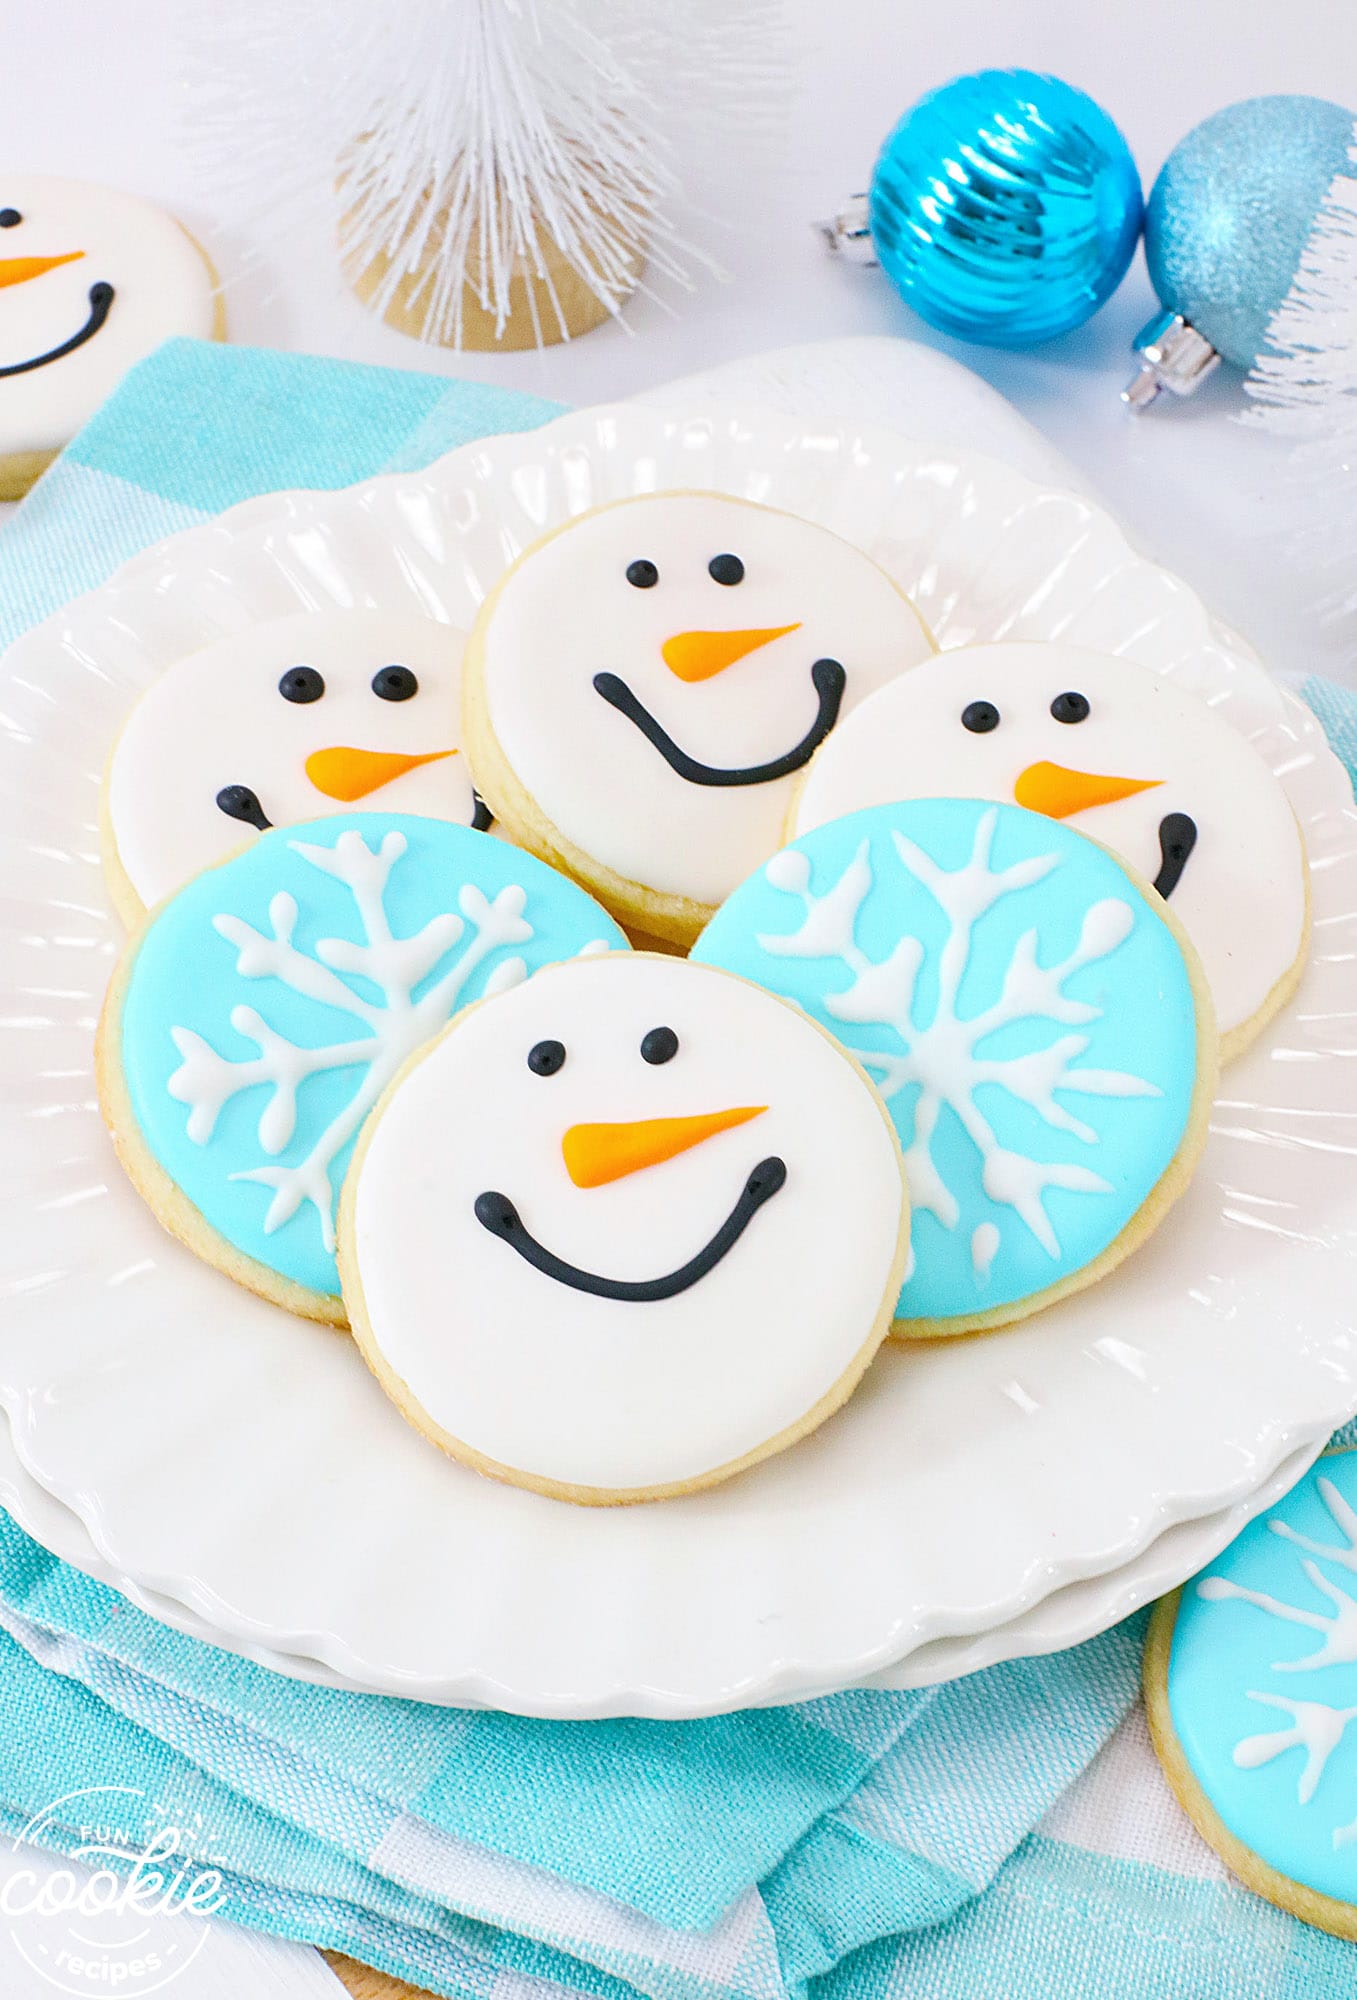 Snowman and snowflake sugar cookies on a white plate, with blue tea towels